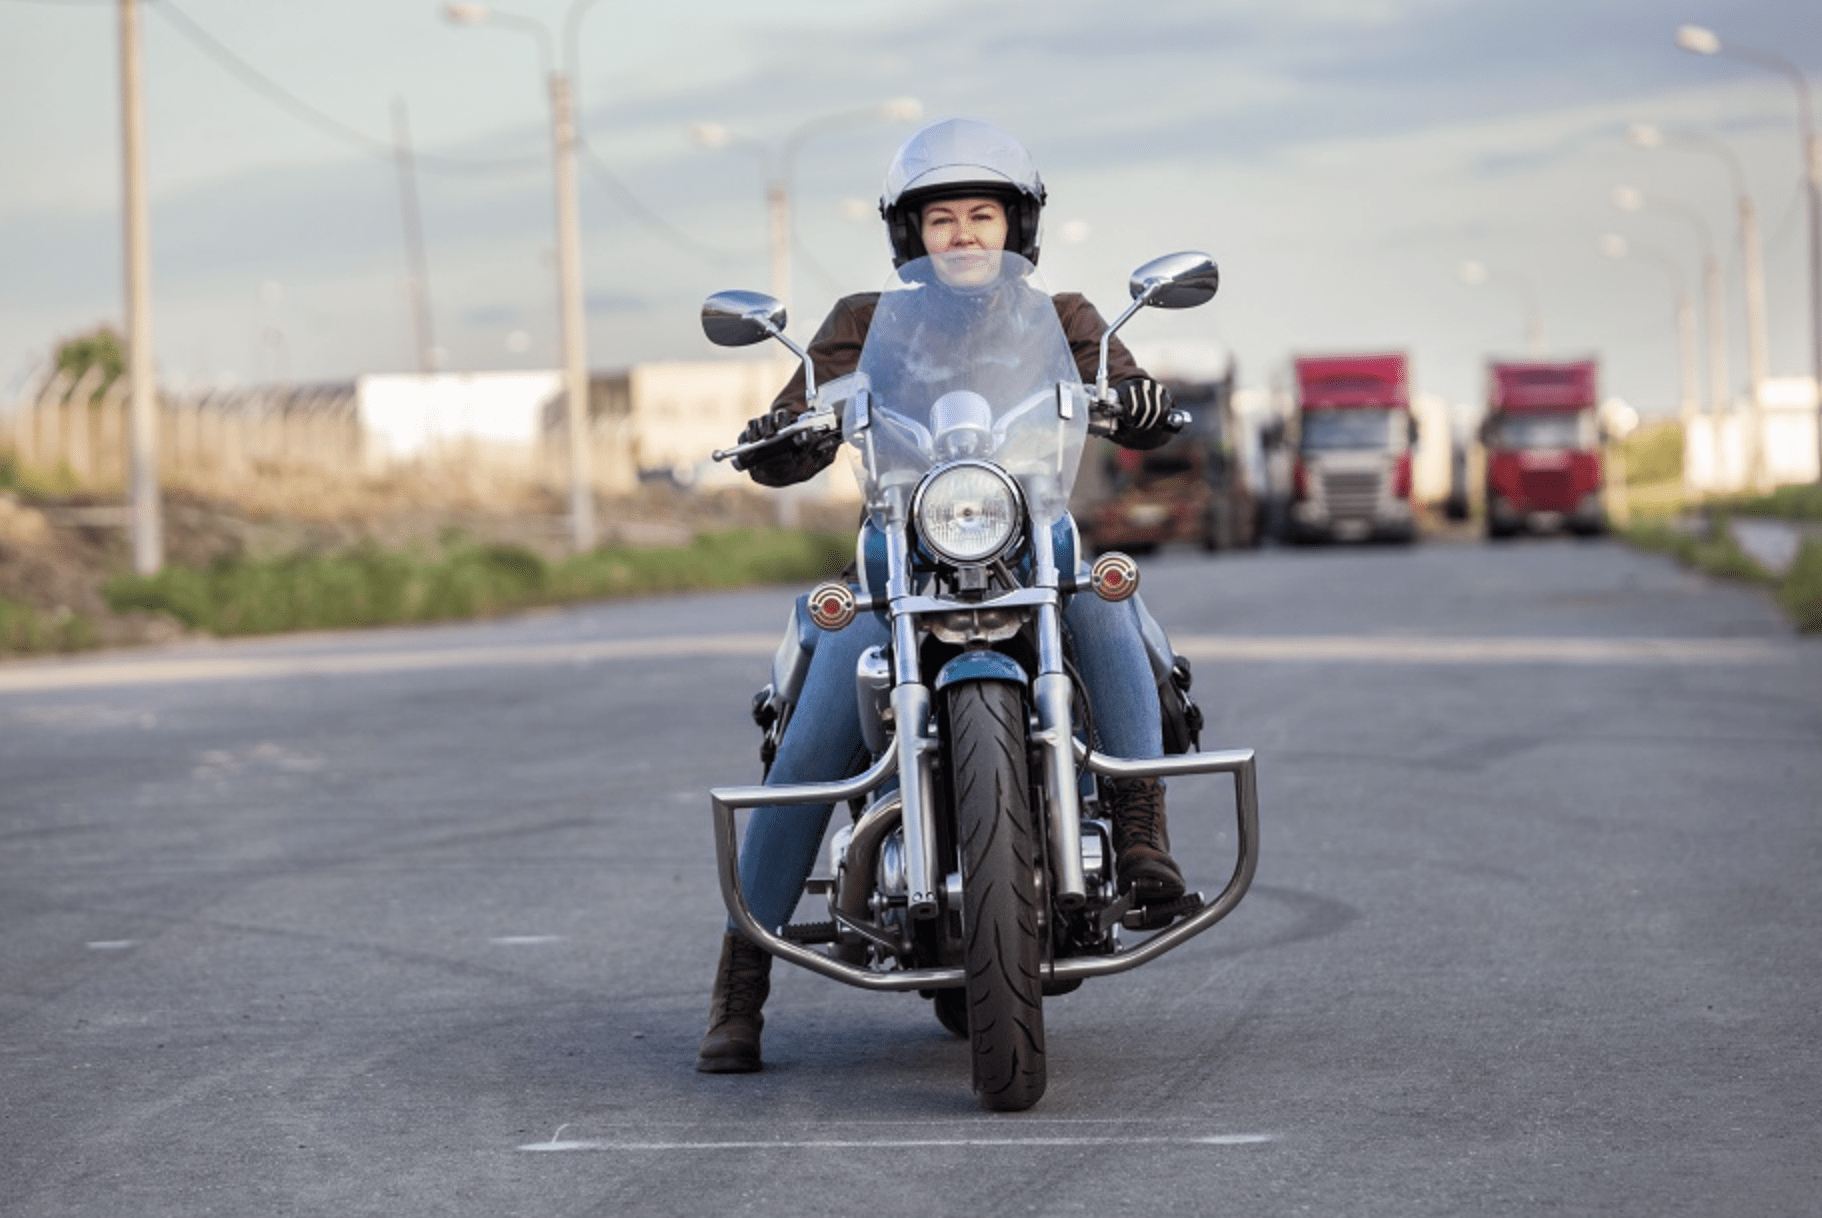 3 Possibly Life-Saving Things You’ll Learn in Motorcycle Safety School